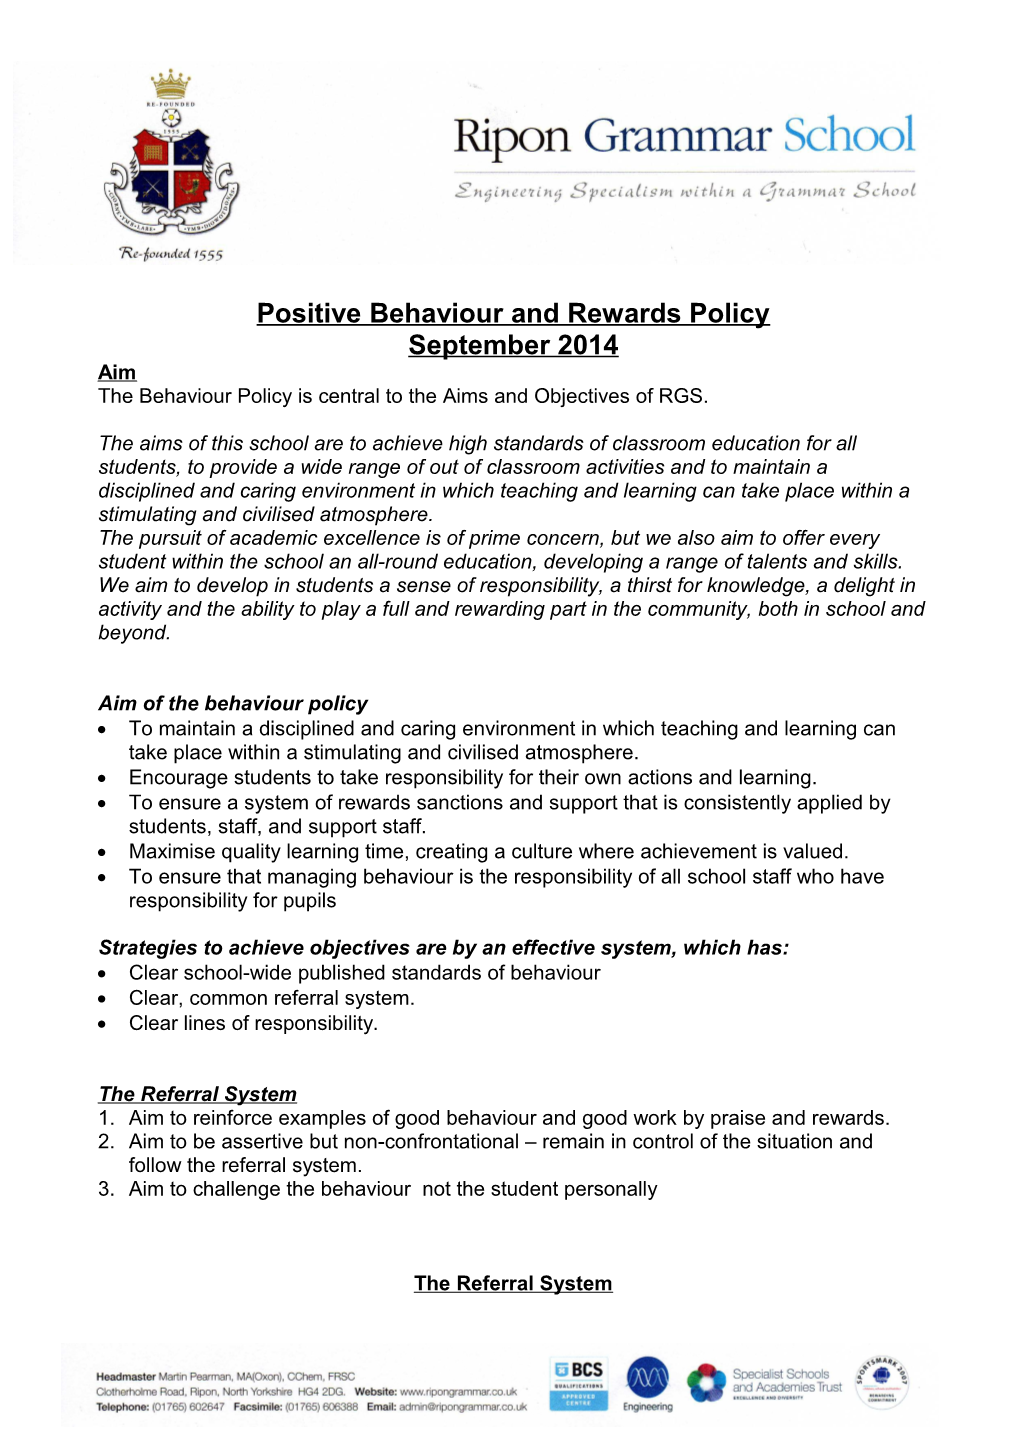 Positive Behaviour and Rewards Policy